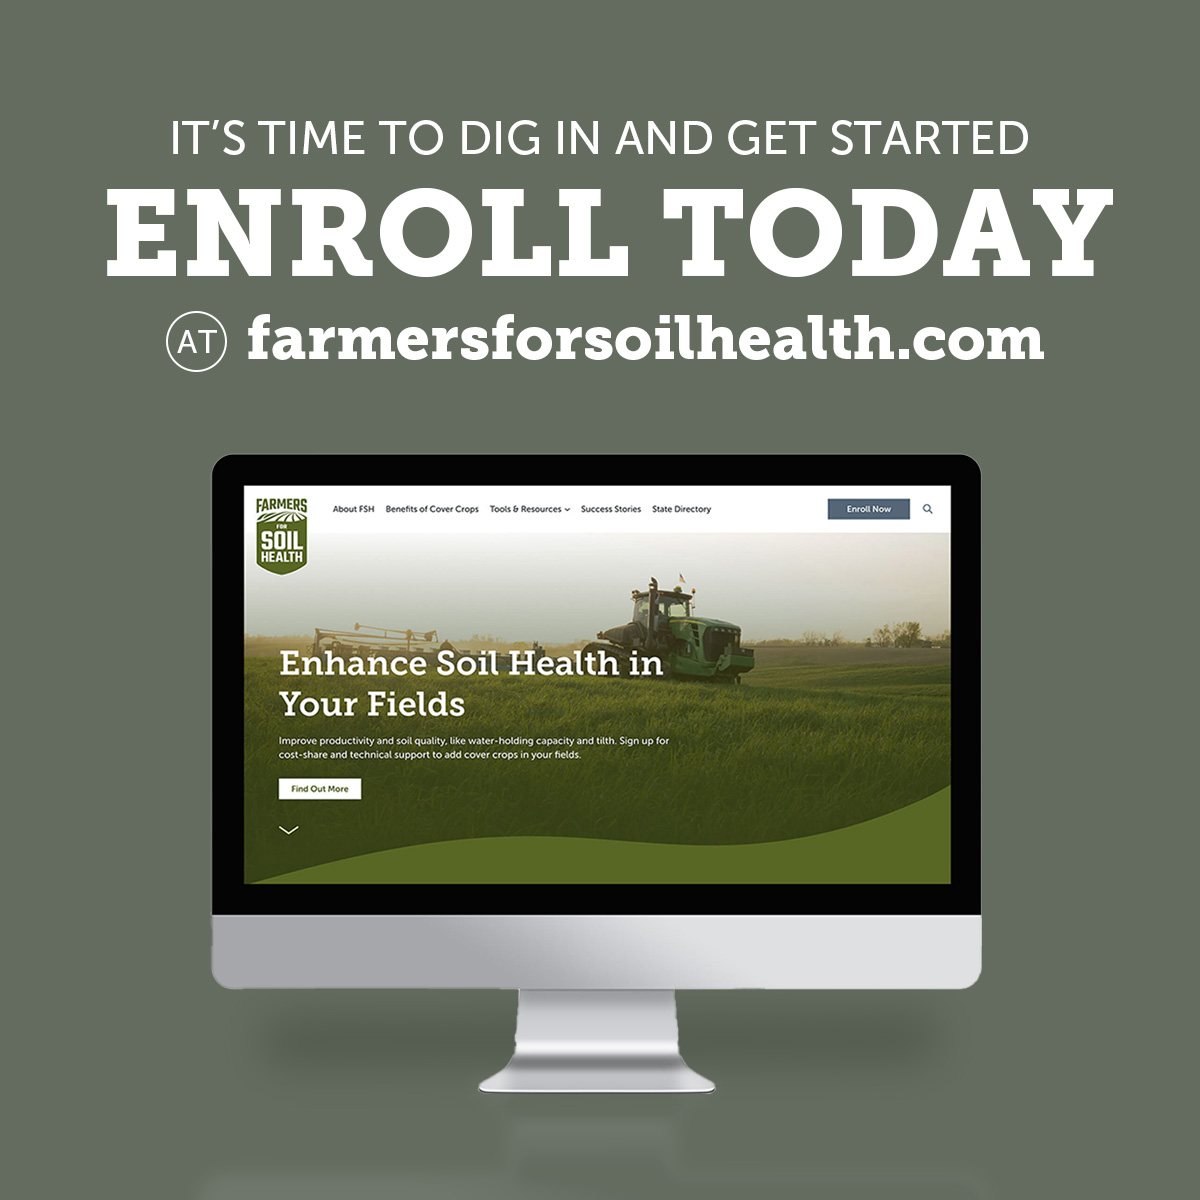 Farmers for Soil Health enables state commodity groups and other partners to assist you in implementing and maintaining soil health practices like cover crops. Learn more and enroll today! 👉 bit.ly/3r3bKZg @NationalPork @NationalCorn